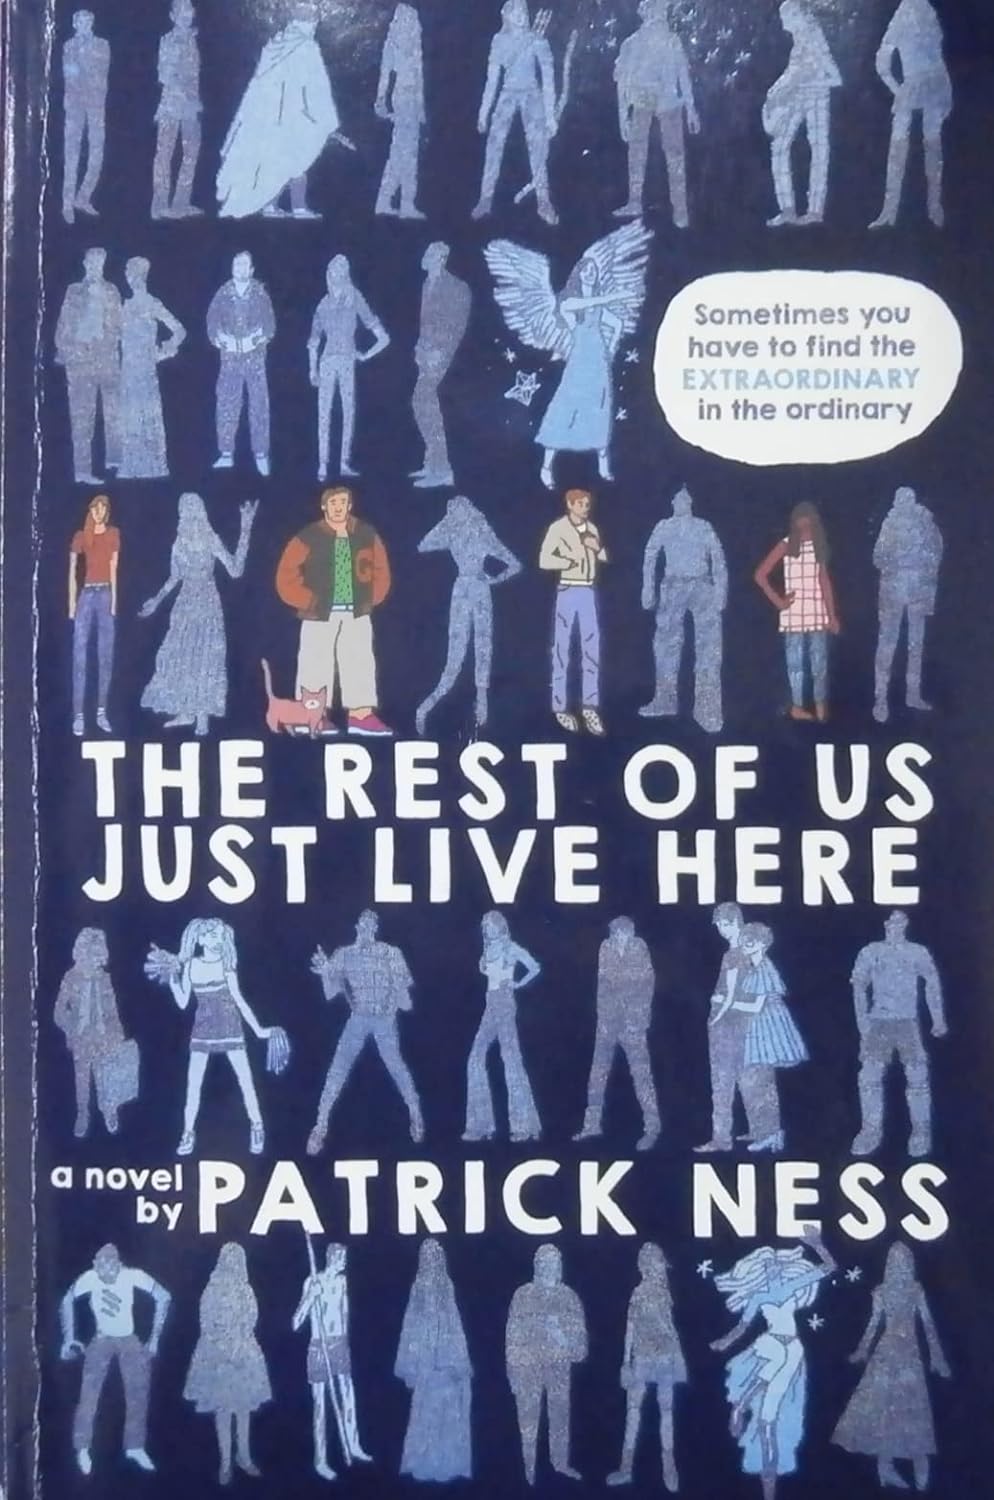 The Rest Of Us Just Live Here by Patrick Ness